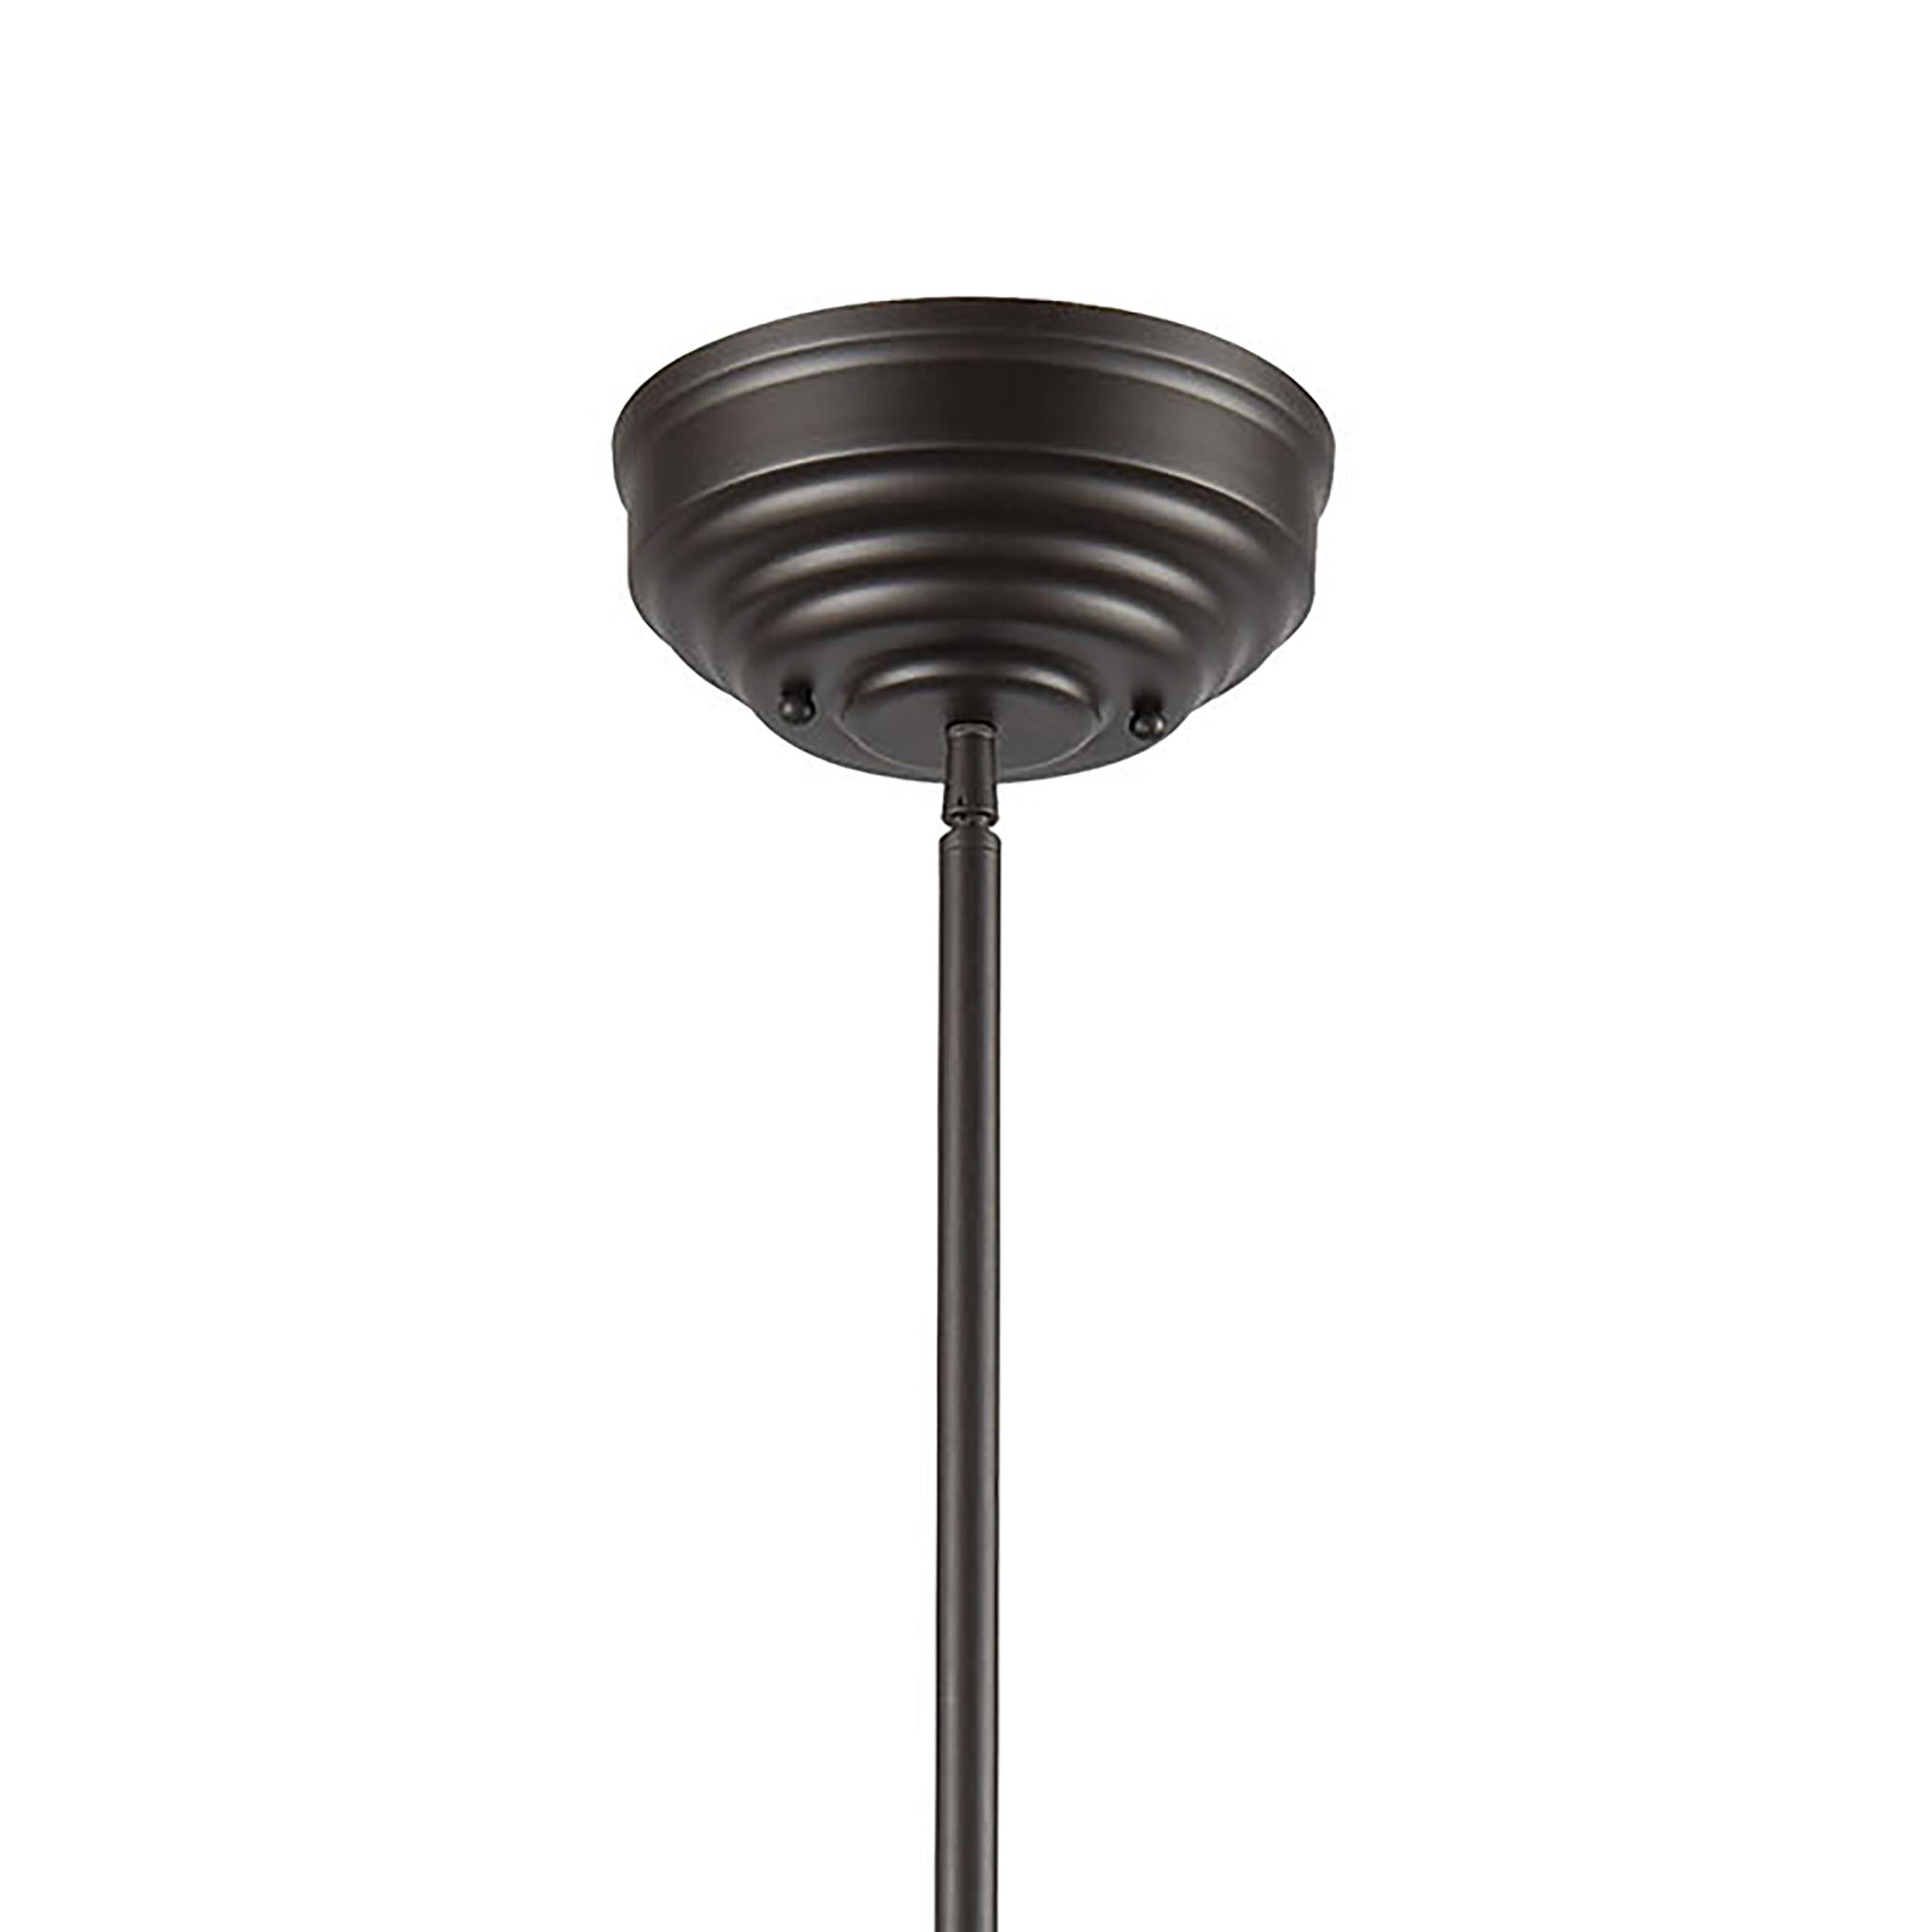 ELK Lighting 67217-3 Chadwick 3-Light Island Light in Oil Rubbed Bronze with Metal and Frosted Glass